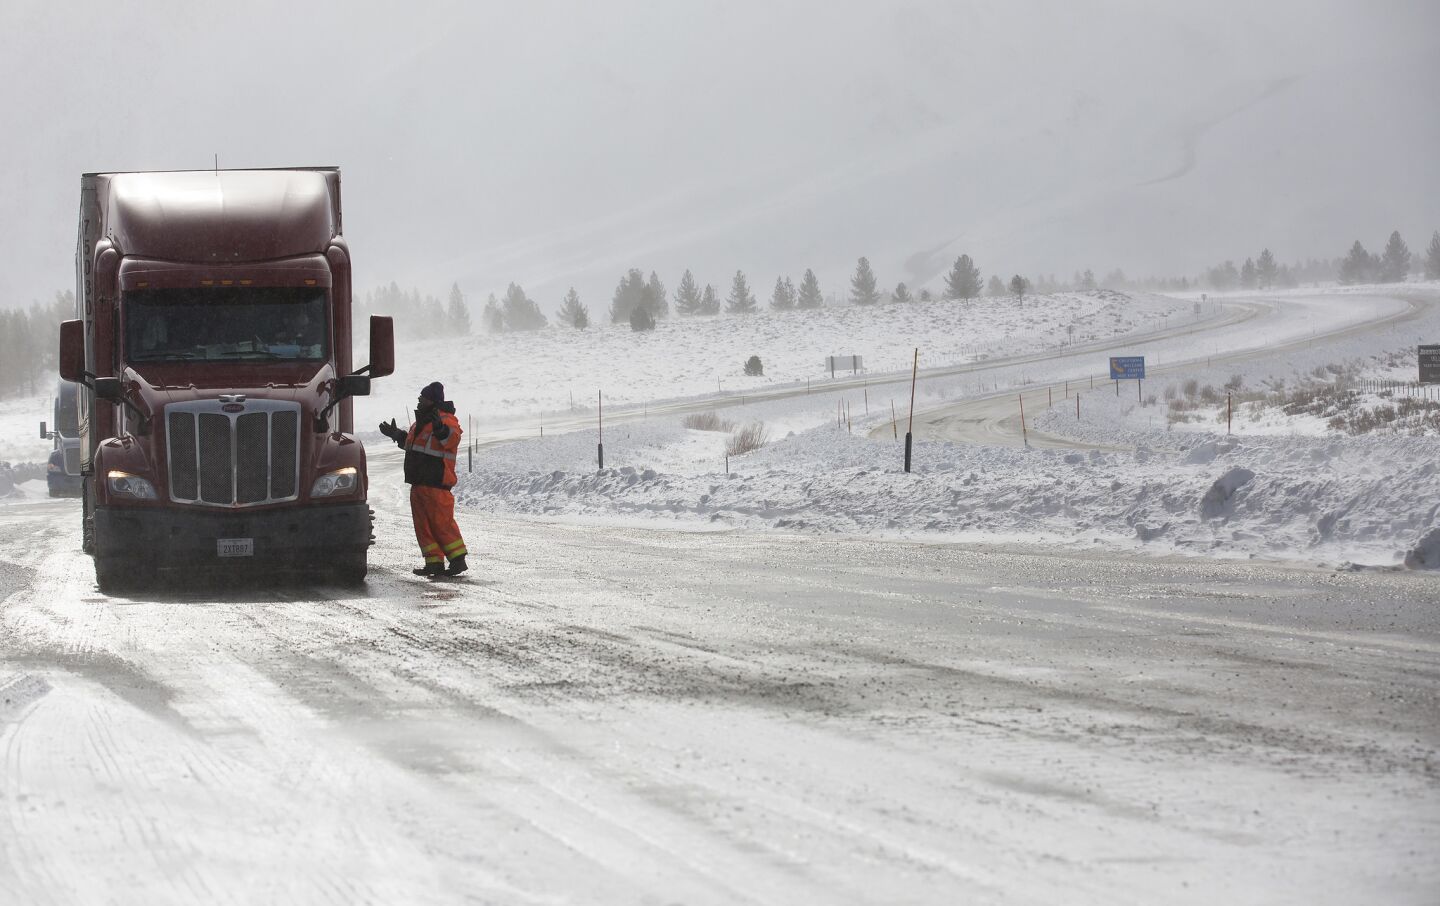 Caltrans worker Mark Reistetter tells a Reno-bound truck driver his options at a checkpoint closing all northbound traffic at U.S. 395 and State Route 203 near Mammoth Lakes.